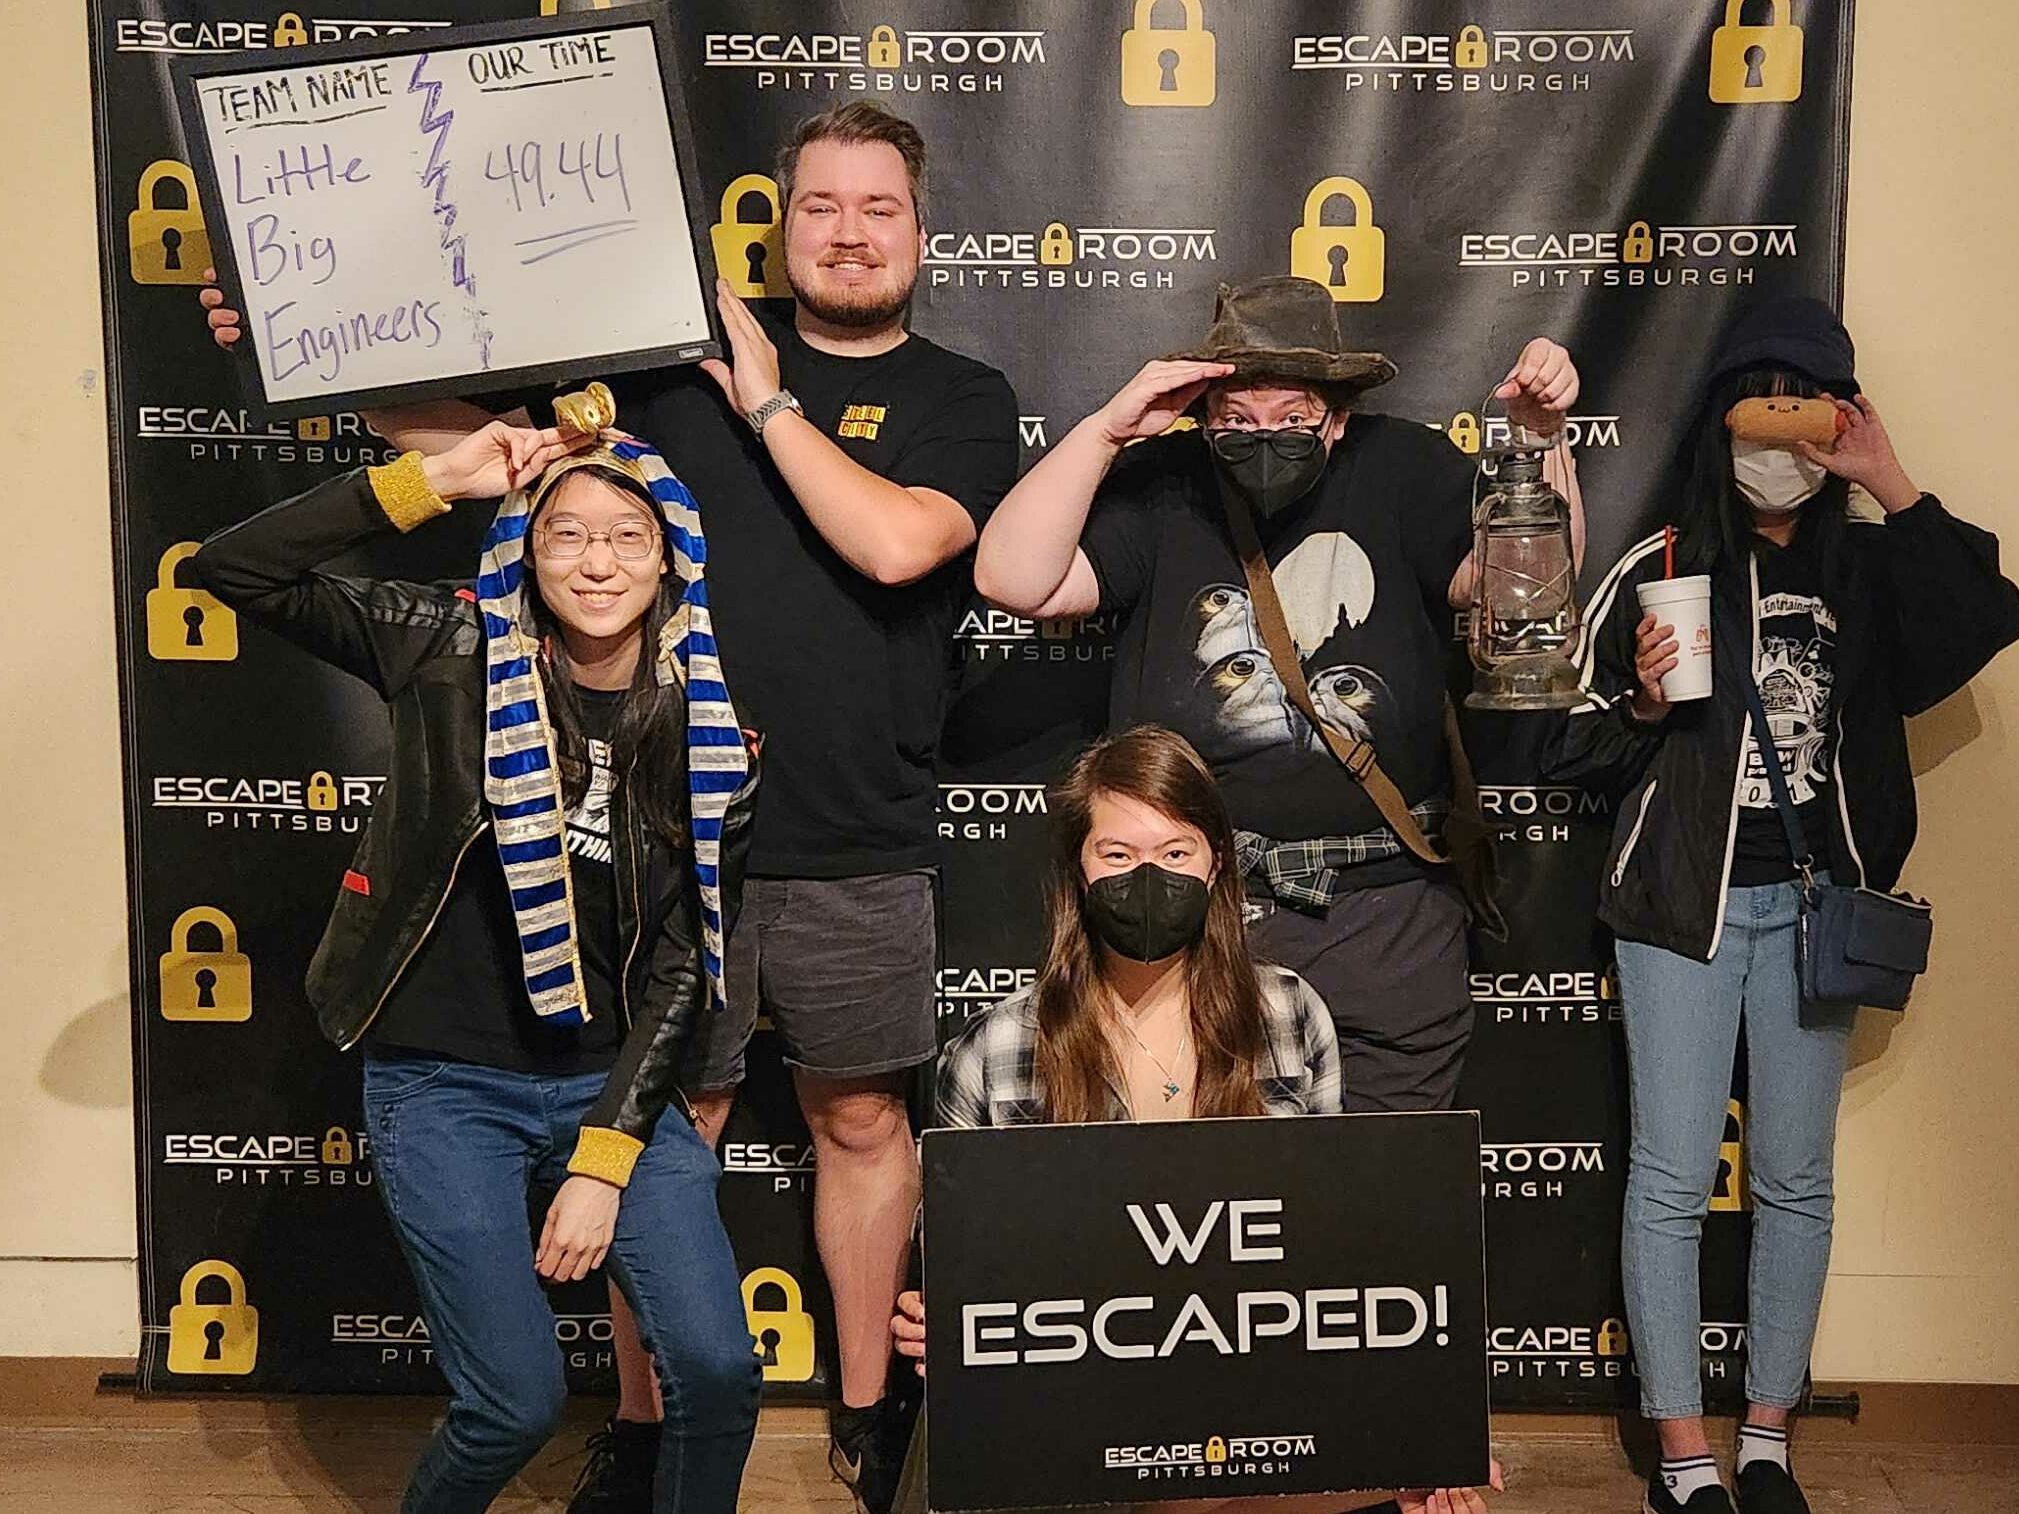 Our team poses in front of the Escape Room Pittsburgh backdrop, wearing items themed to the Tomb Explorer room. Nolan holds a board showing our time of 49:44.